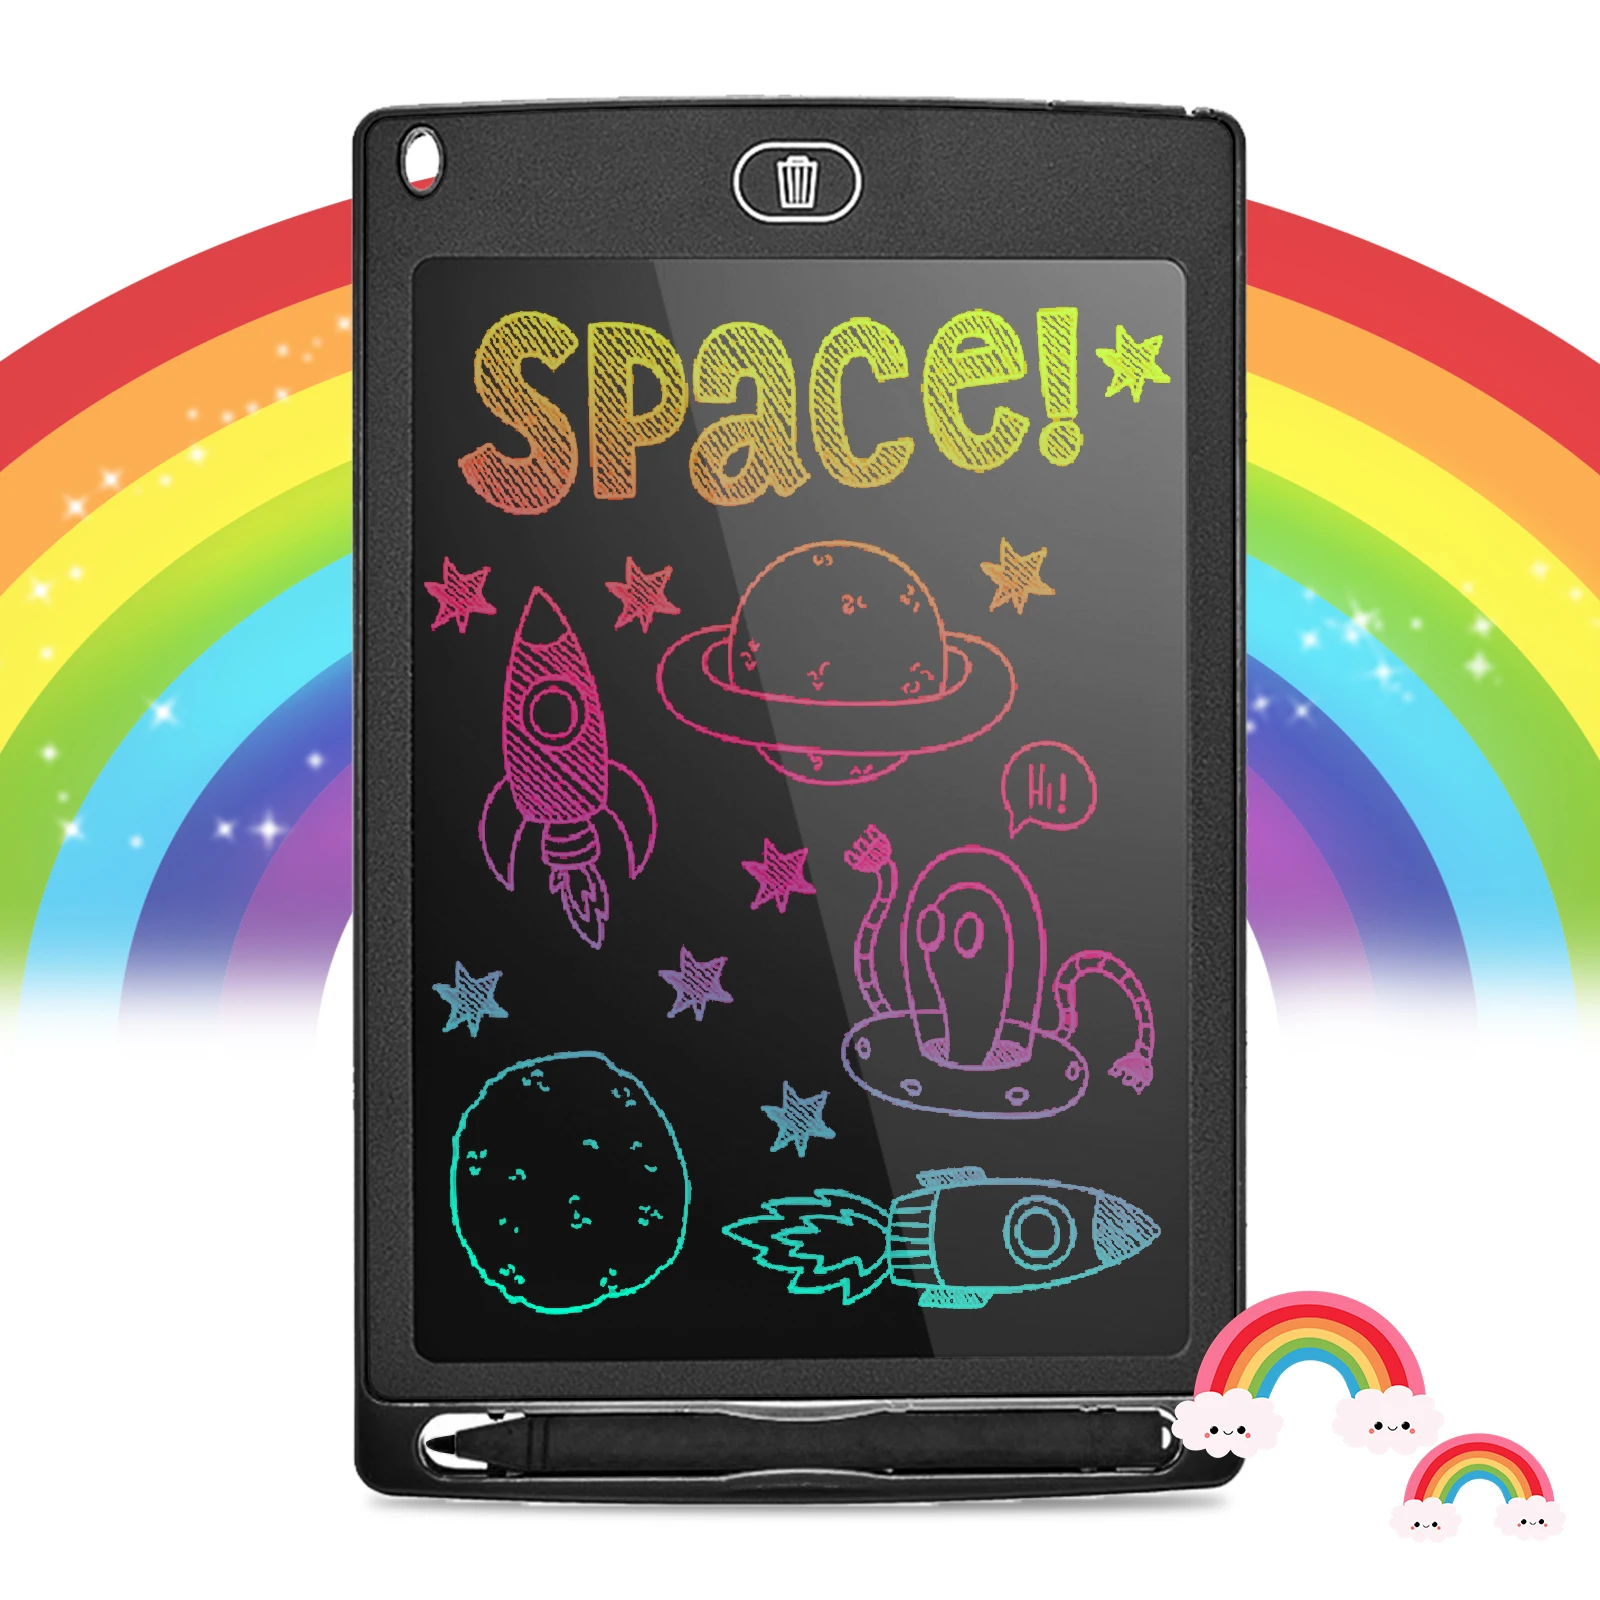 8.5inch/6.5inch LCD Writing Tablet Digital Graphic Electronic Handwriting Magic Pad Blackboard for Kids Color Drawing images - 6